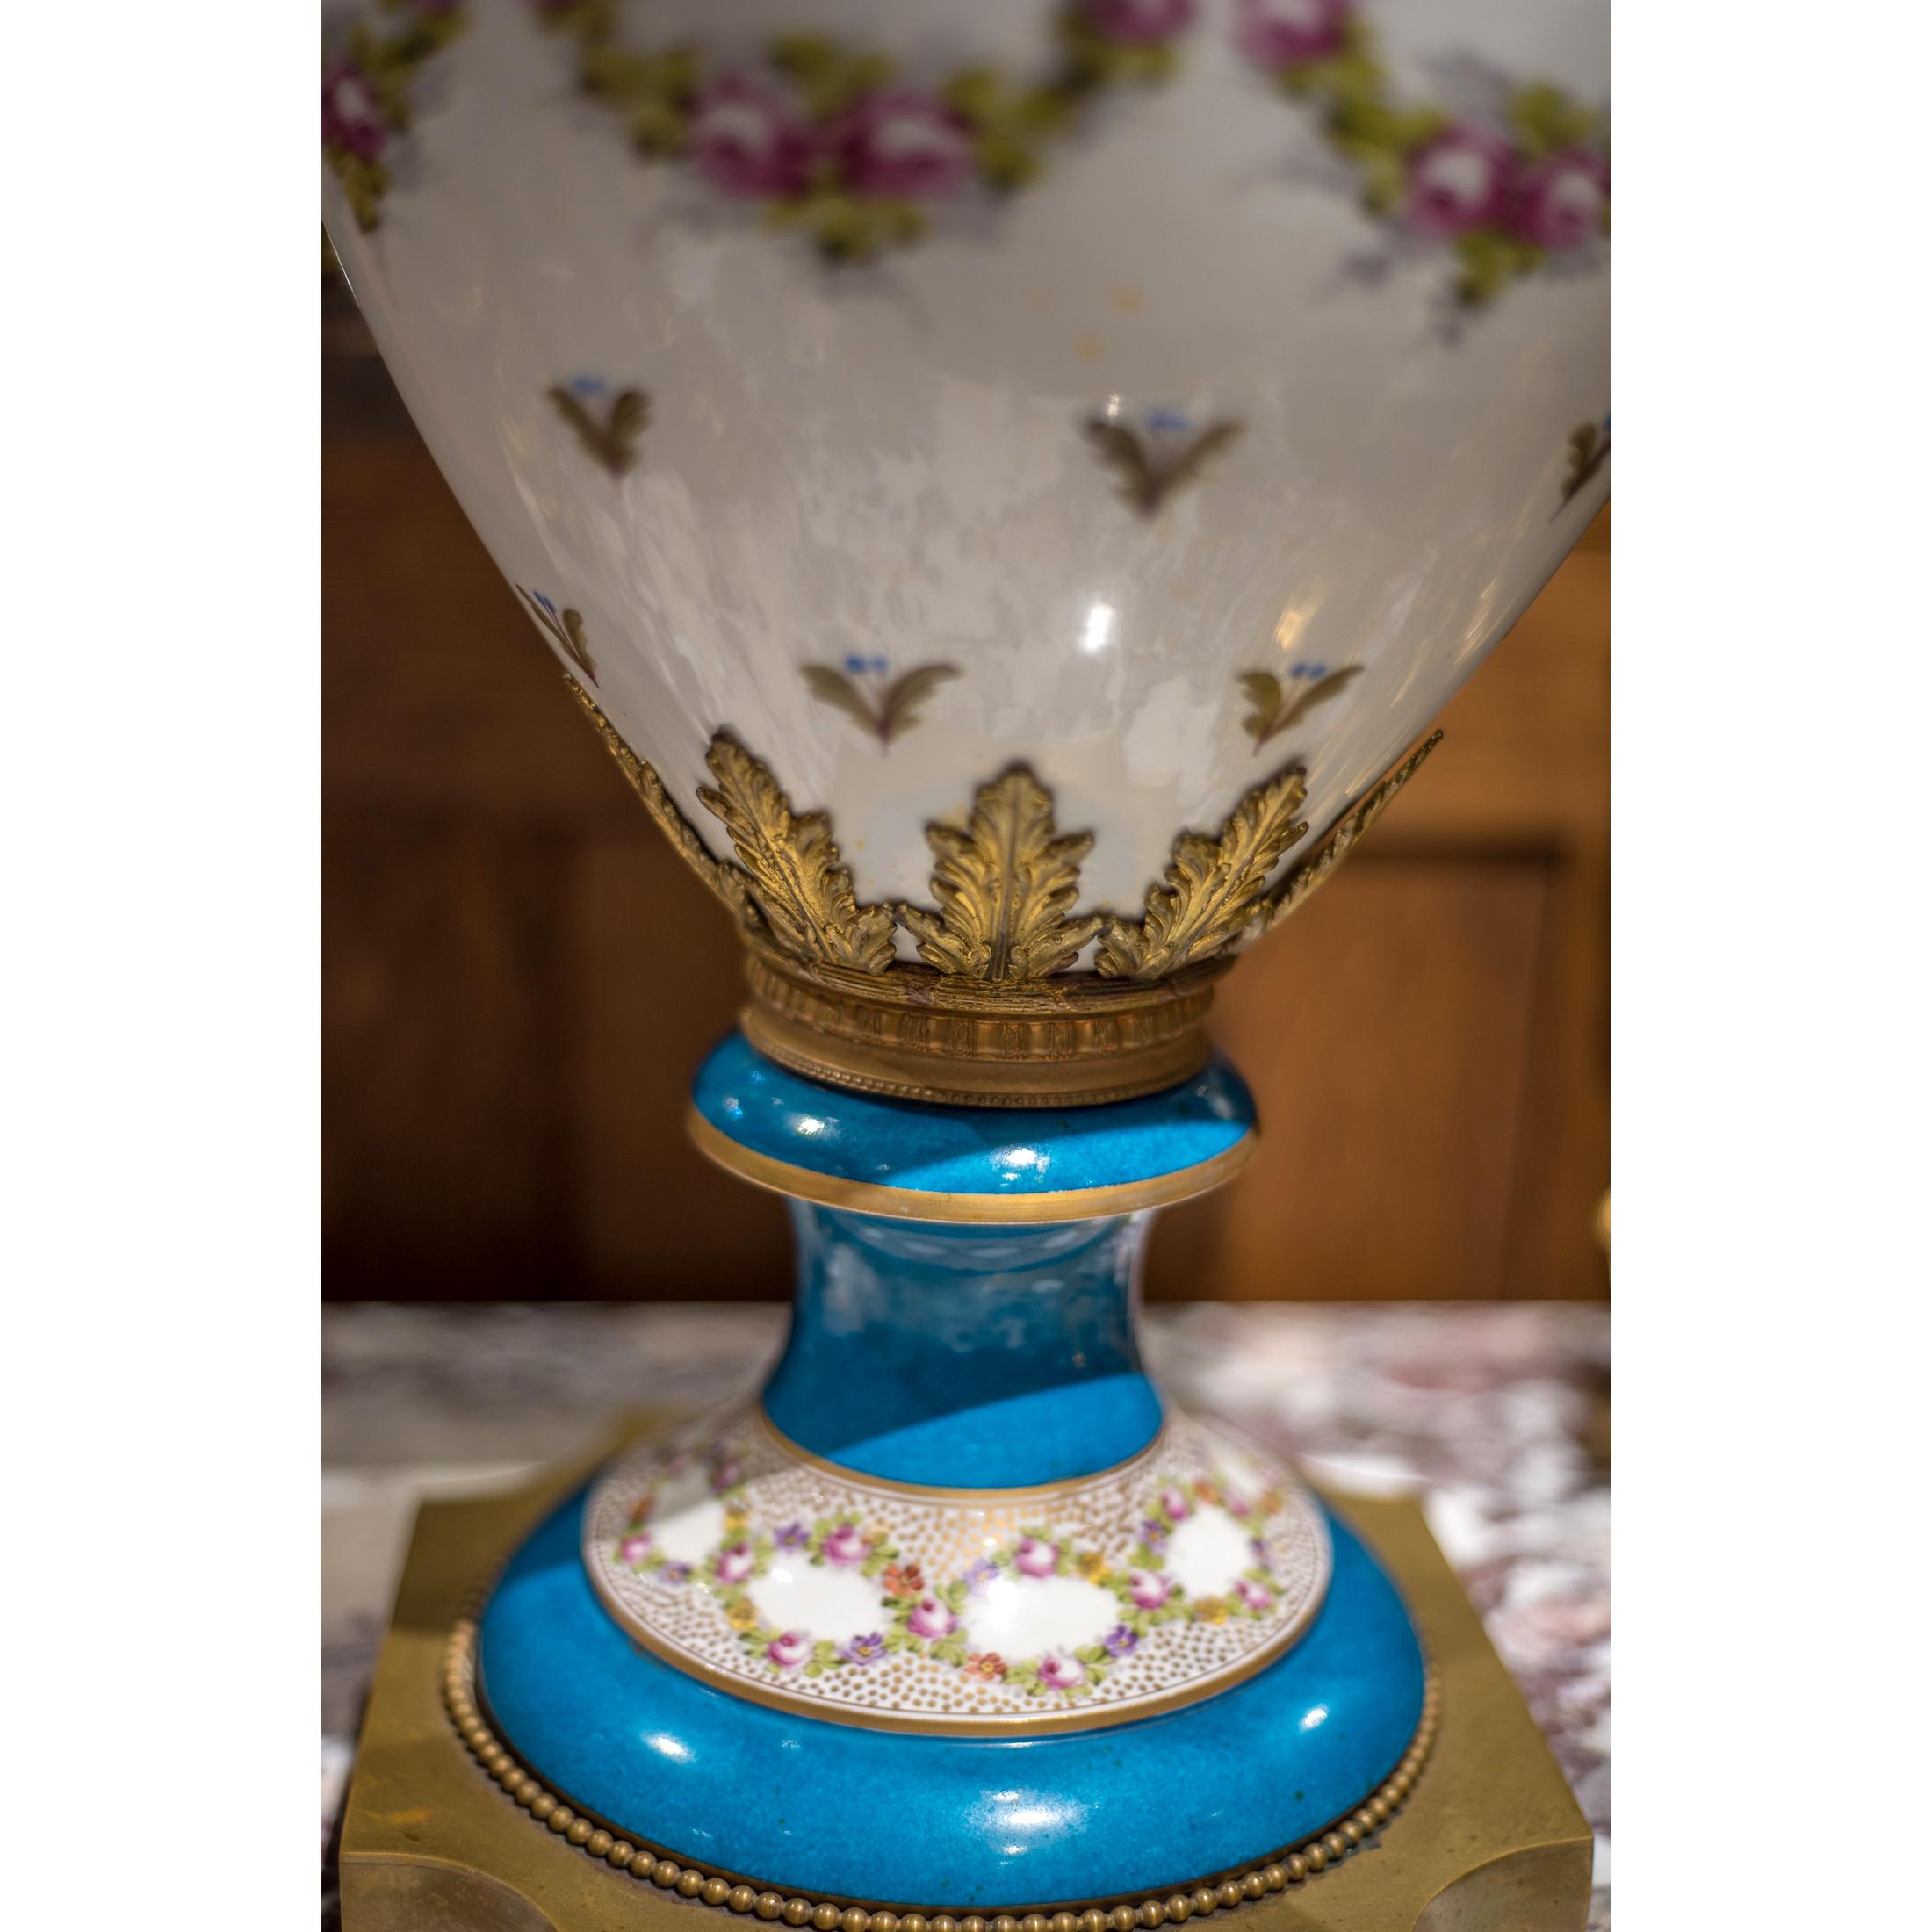 Late 19th Century French Sèvres-Style Ormolu-Mounted Porcelain Vase In Good Condition For Sale In New York, NY